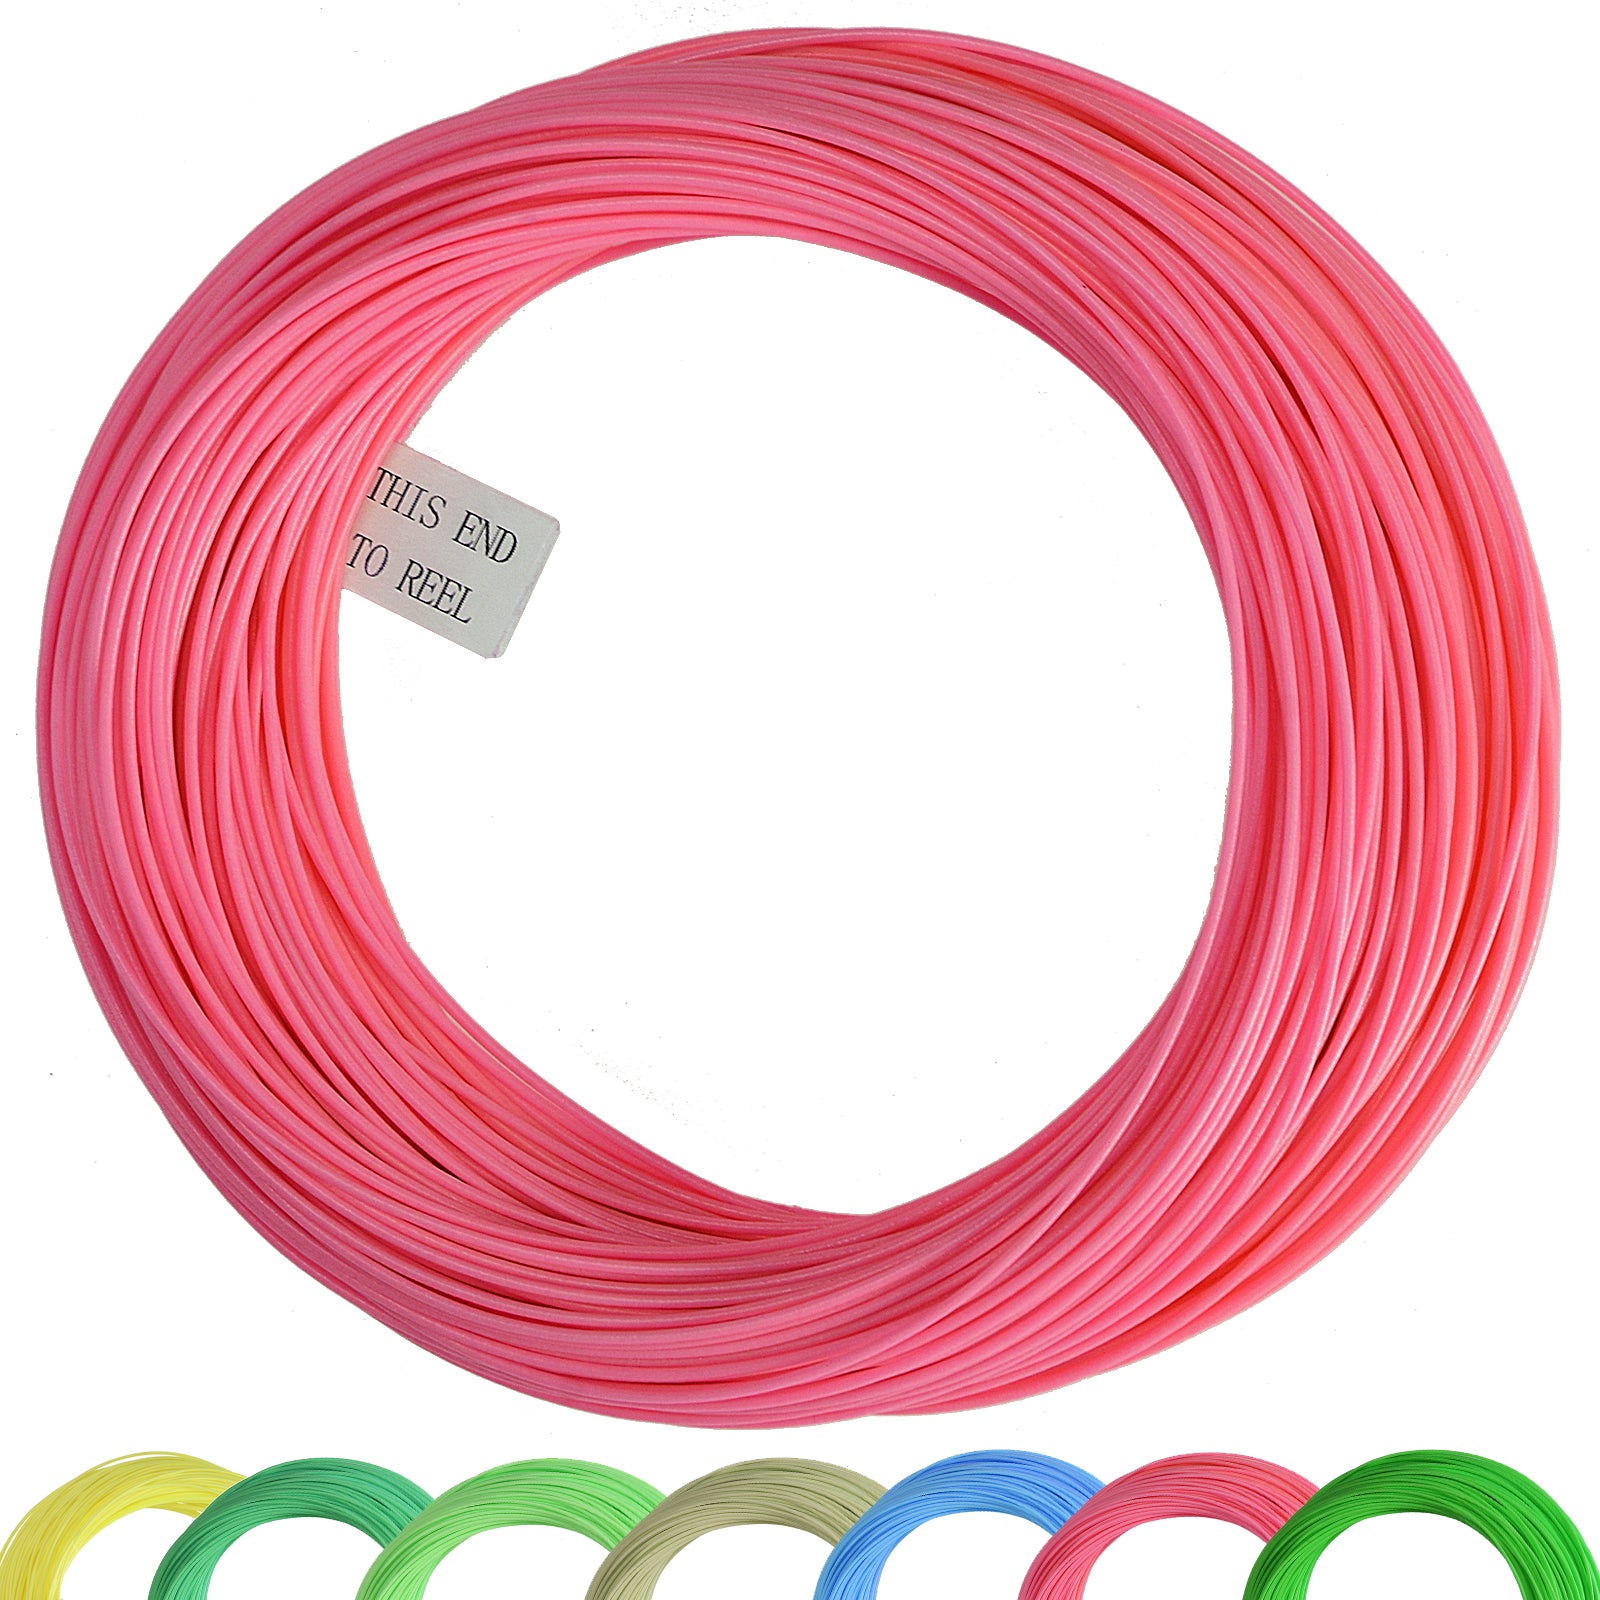 SF Weight Forward Floating Fly line Fly Fishing Line Pink 3wt